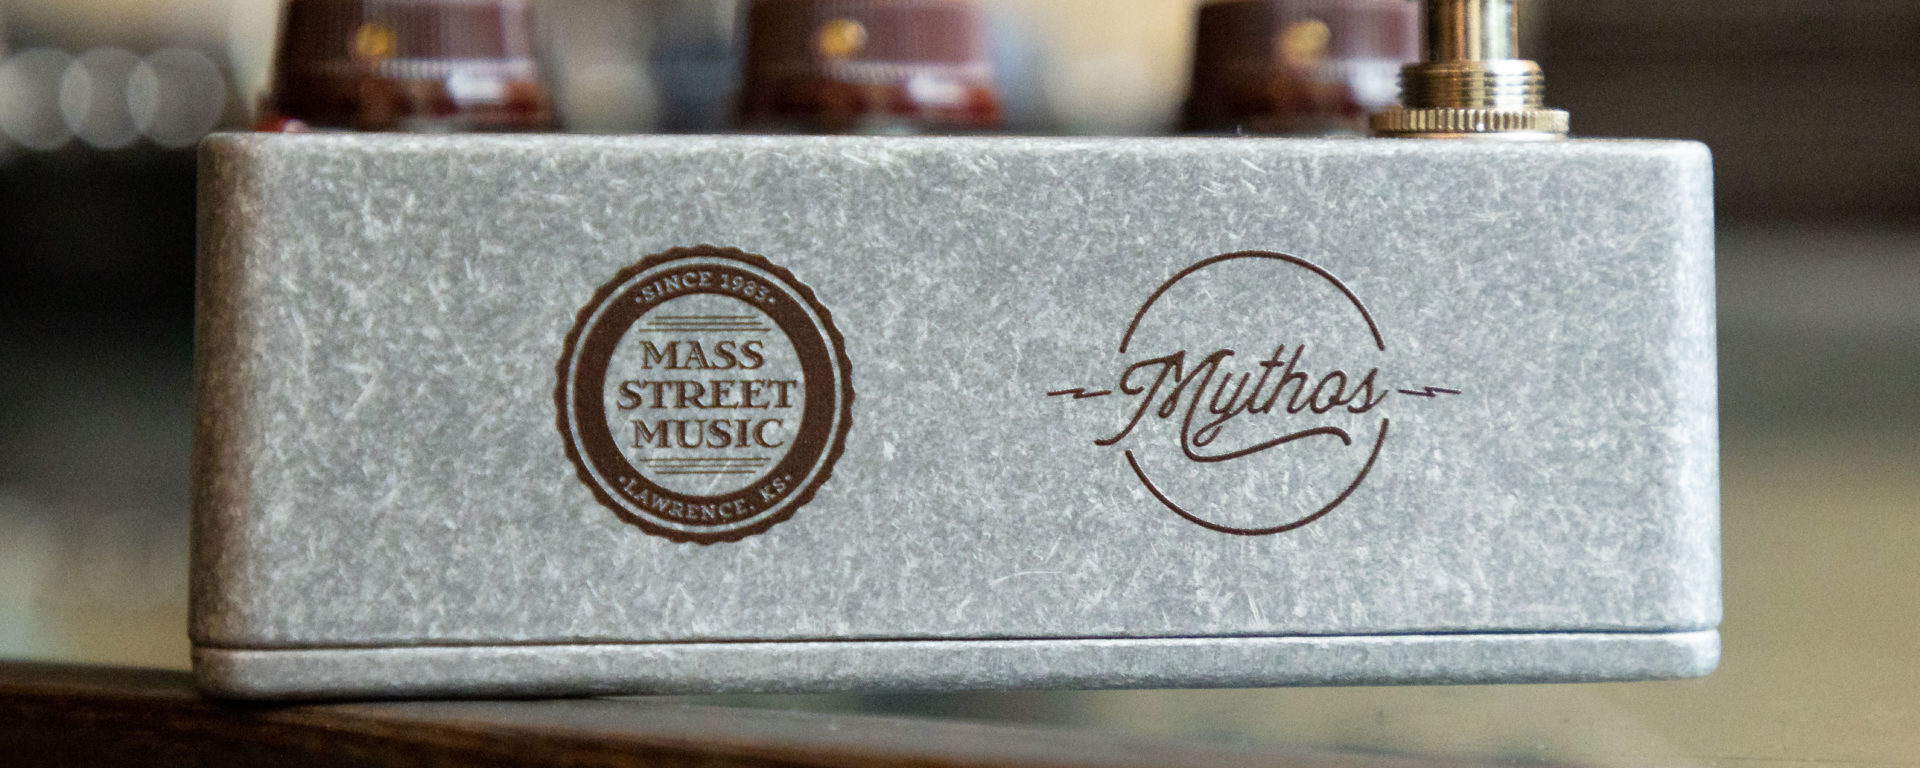 Mythos Pedals and Mass Street Music